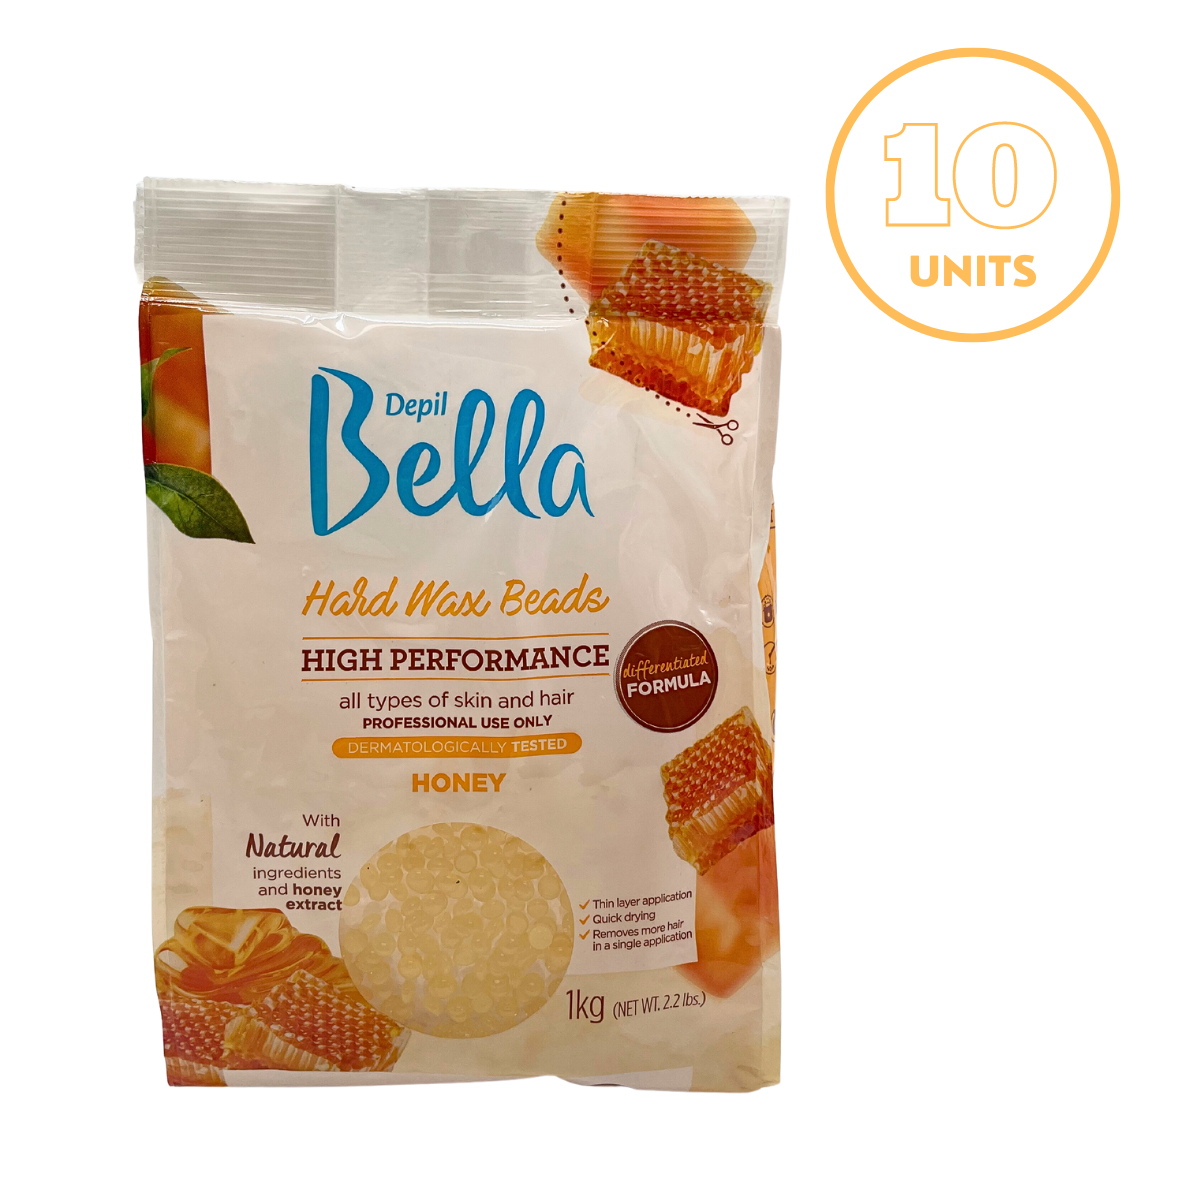 Depil Bella Hard Wax Beads Honey - Professional Hair Removal, 2.2 lbs (10 Units Offer) - Buy professional cosmetics dedicated to hair removal